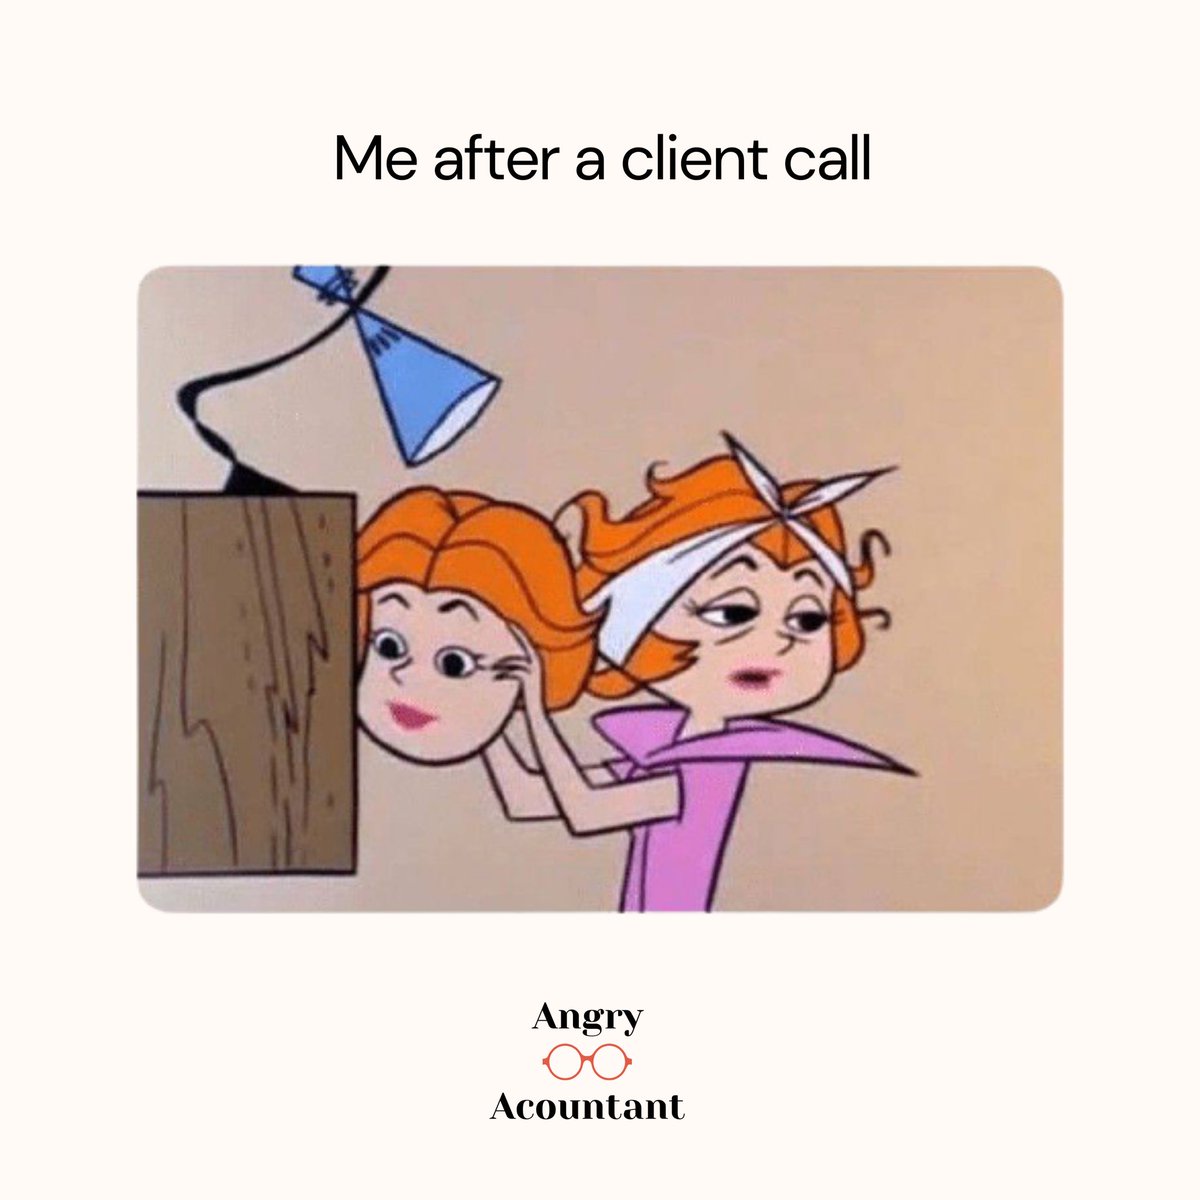 True or nah? #accounting #accountant #audit #auditing #accountingmemes #work #workmemes #workfunny #officememes #office #pwc #deloitte #ernstandyoung #kpmg